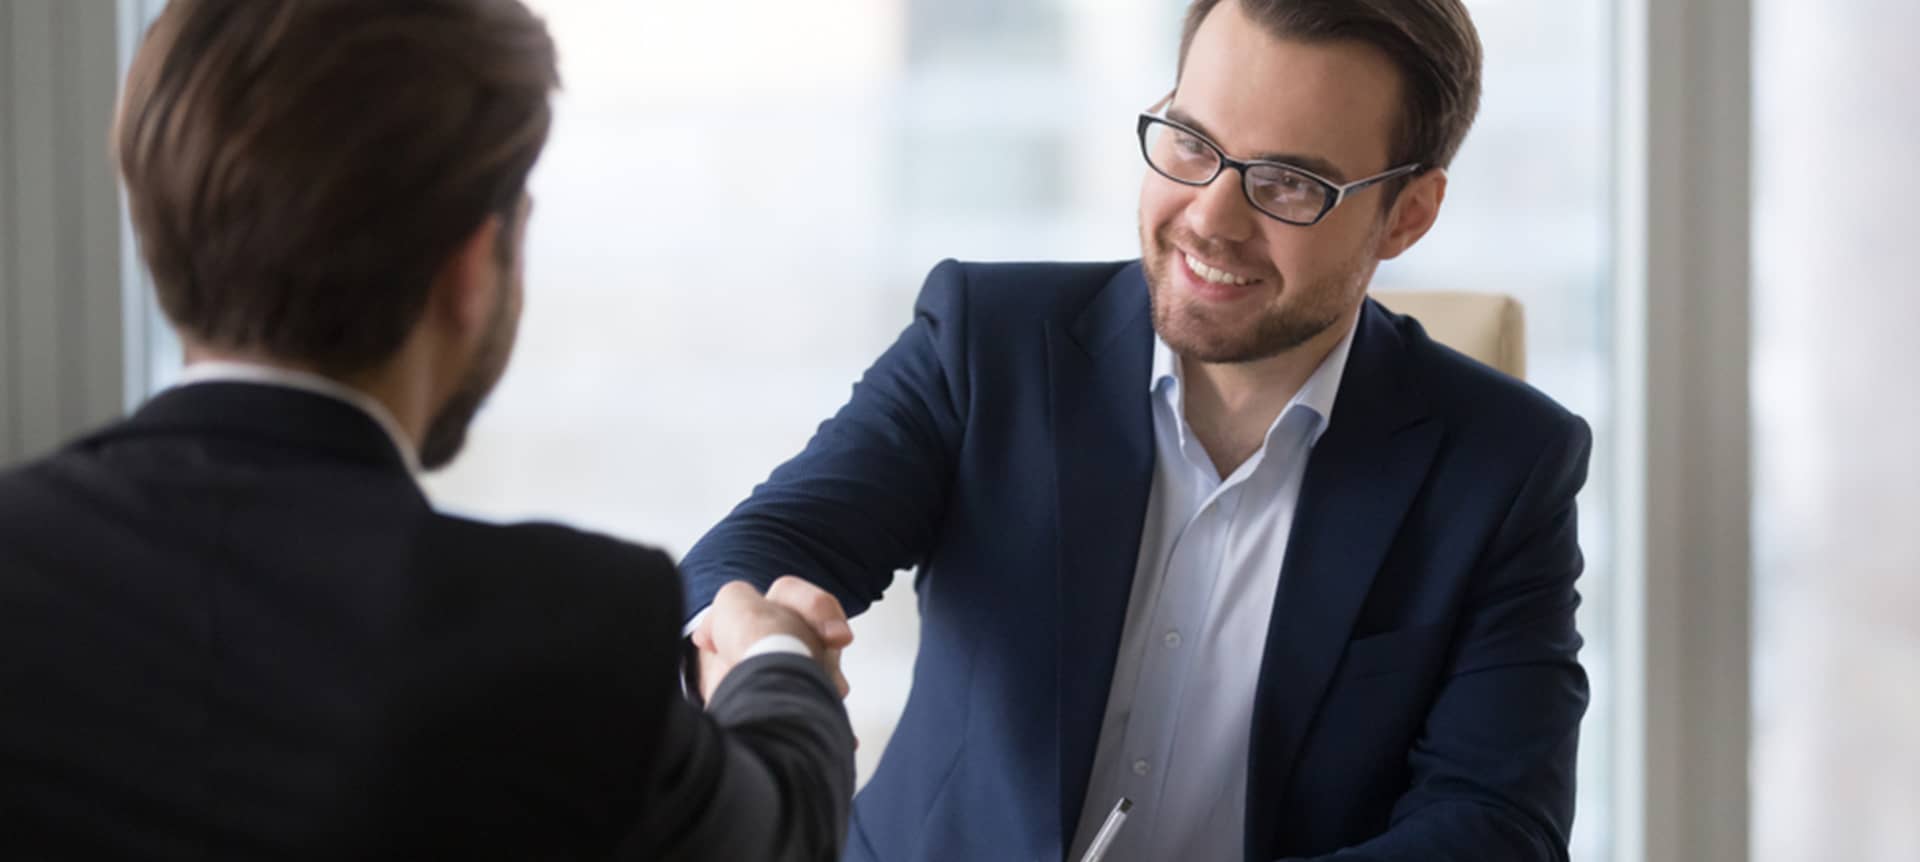 Candidate and recruiter having a cordial handshake after an interview 